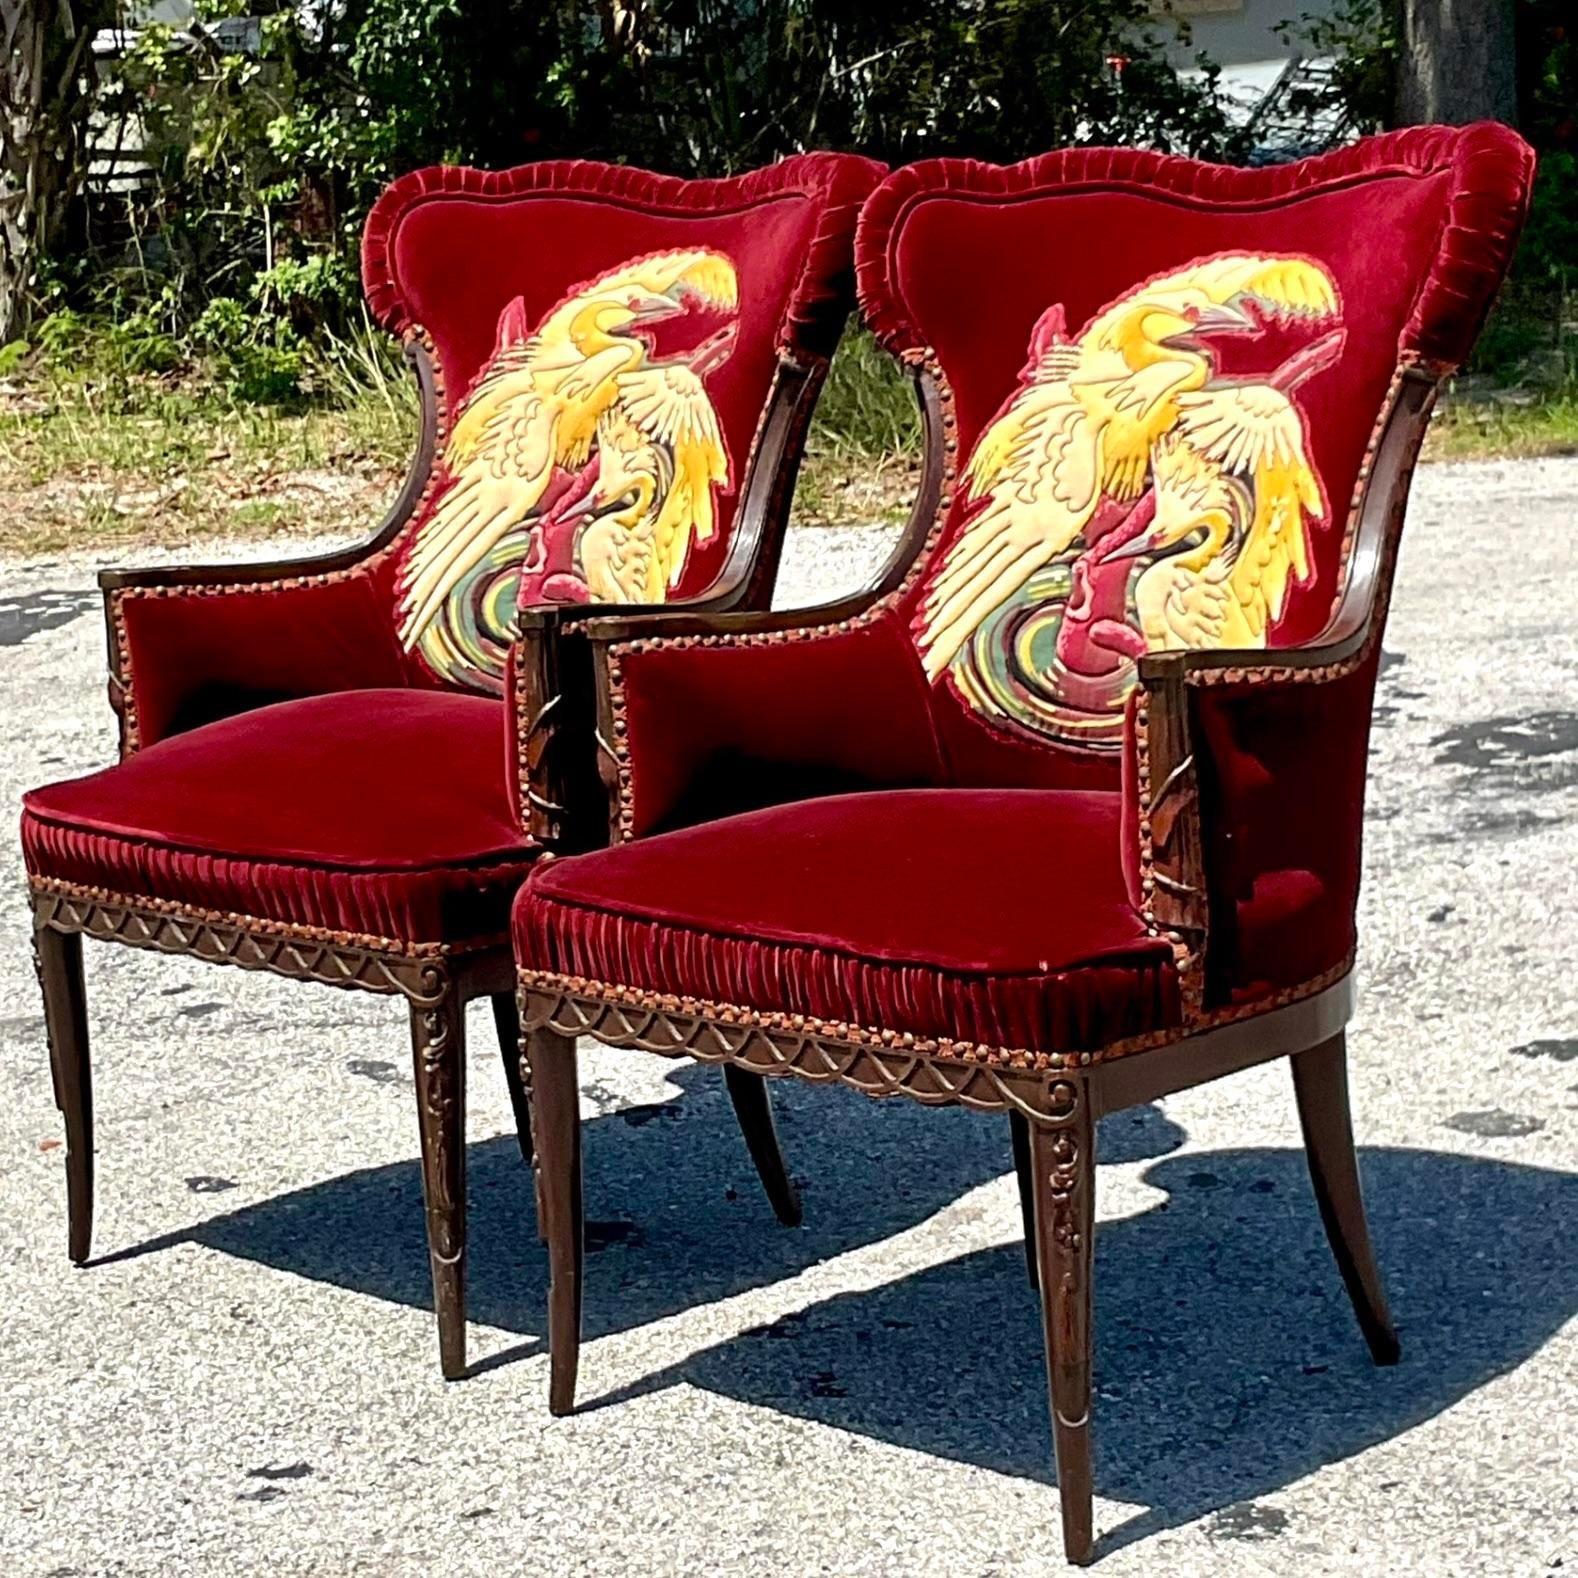 An extraordinary pair of vintage velvet arm chairs. A deep red velvet with a ruched detail along the edge. A fabulous crane design on the back of each chair back. Hand carved detail on the wood trim. Acquired from a Palm Beach estate.